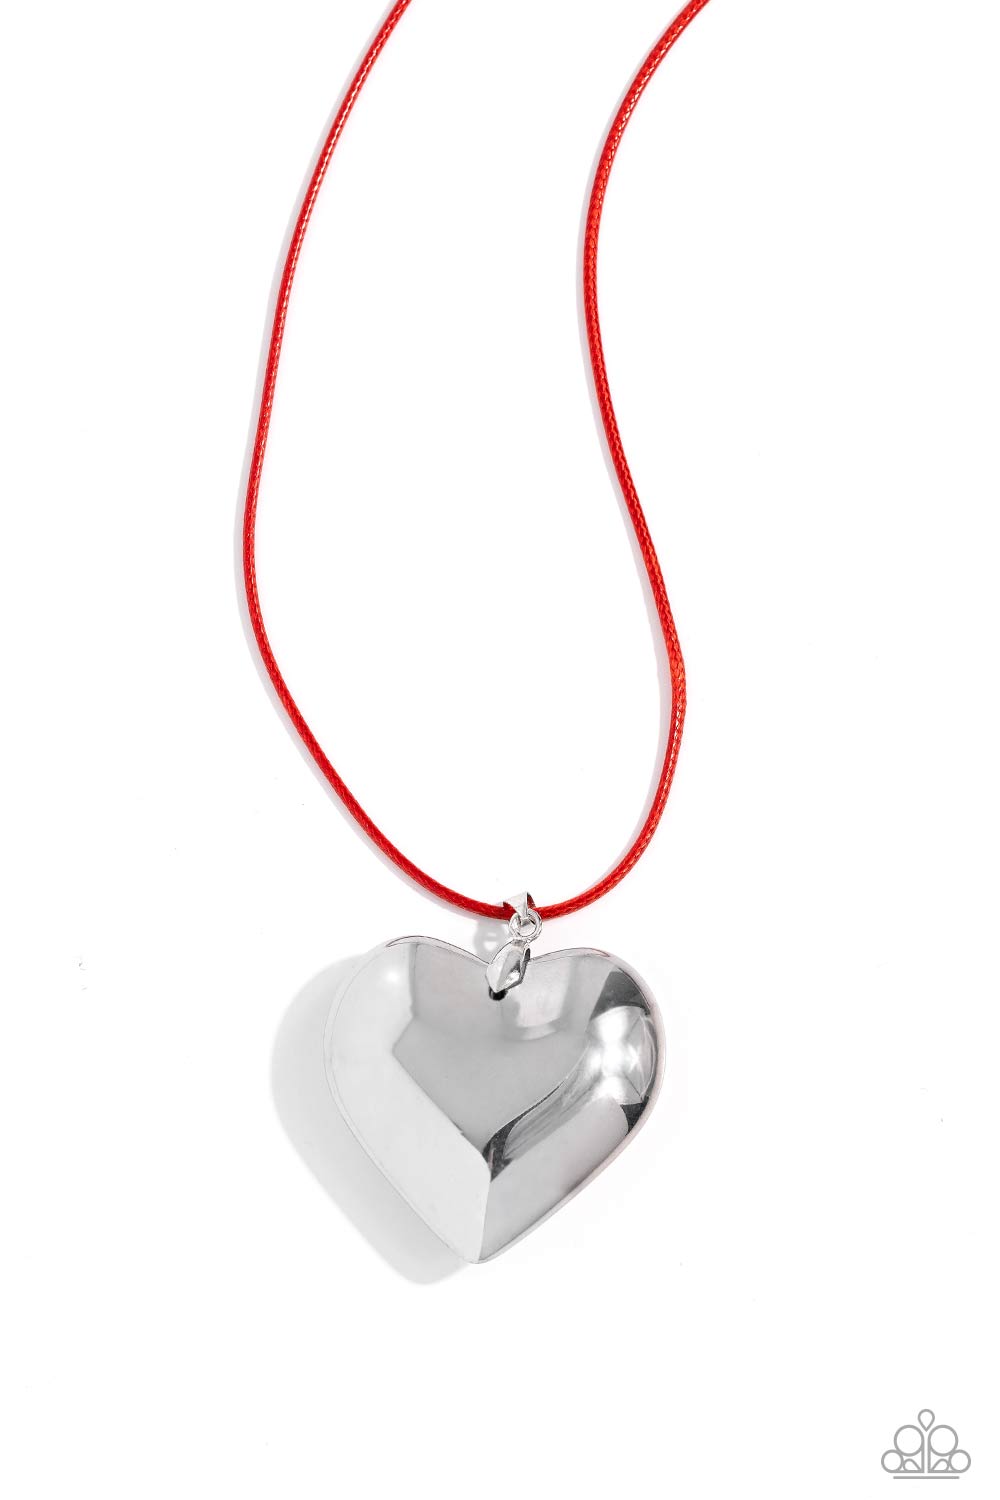 Devoted Daze Red &amp; Silver Heart Necklace - Paparazzi Accessories- lightbox - CarasShop.com - $5 Jewelry by Cara Jewels